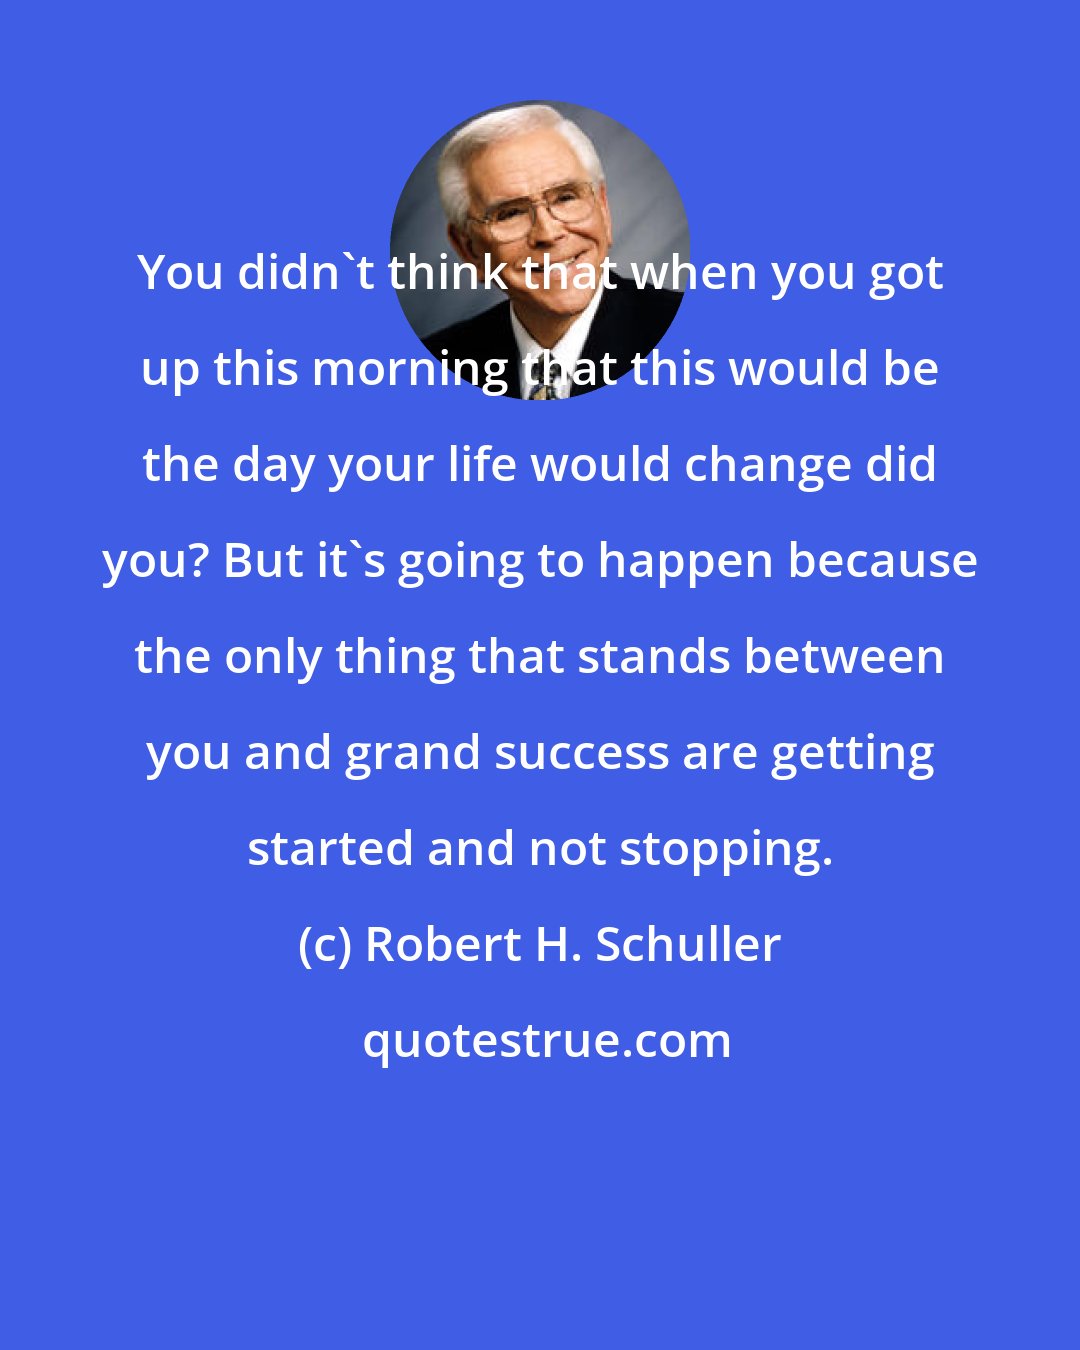 Robert H. Schuller: You didn't think that when you got up this morning that this would be the day your life would change did you? But it's going to happen because the only thing that stands between you and grand success are getting started and not stopping.